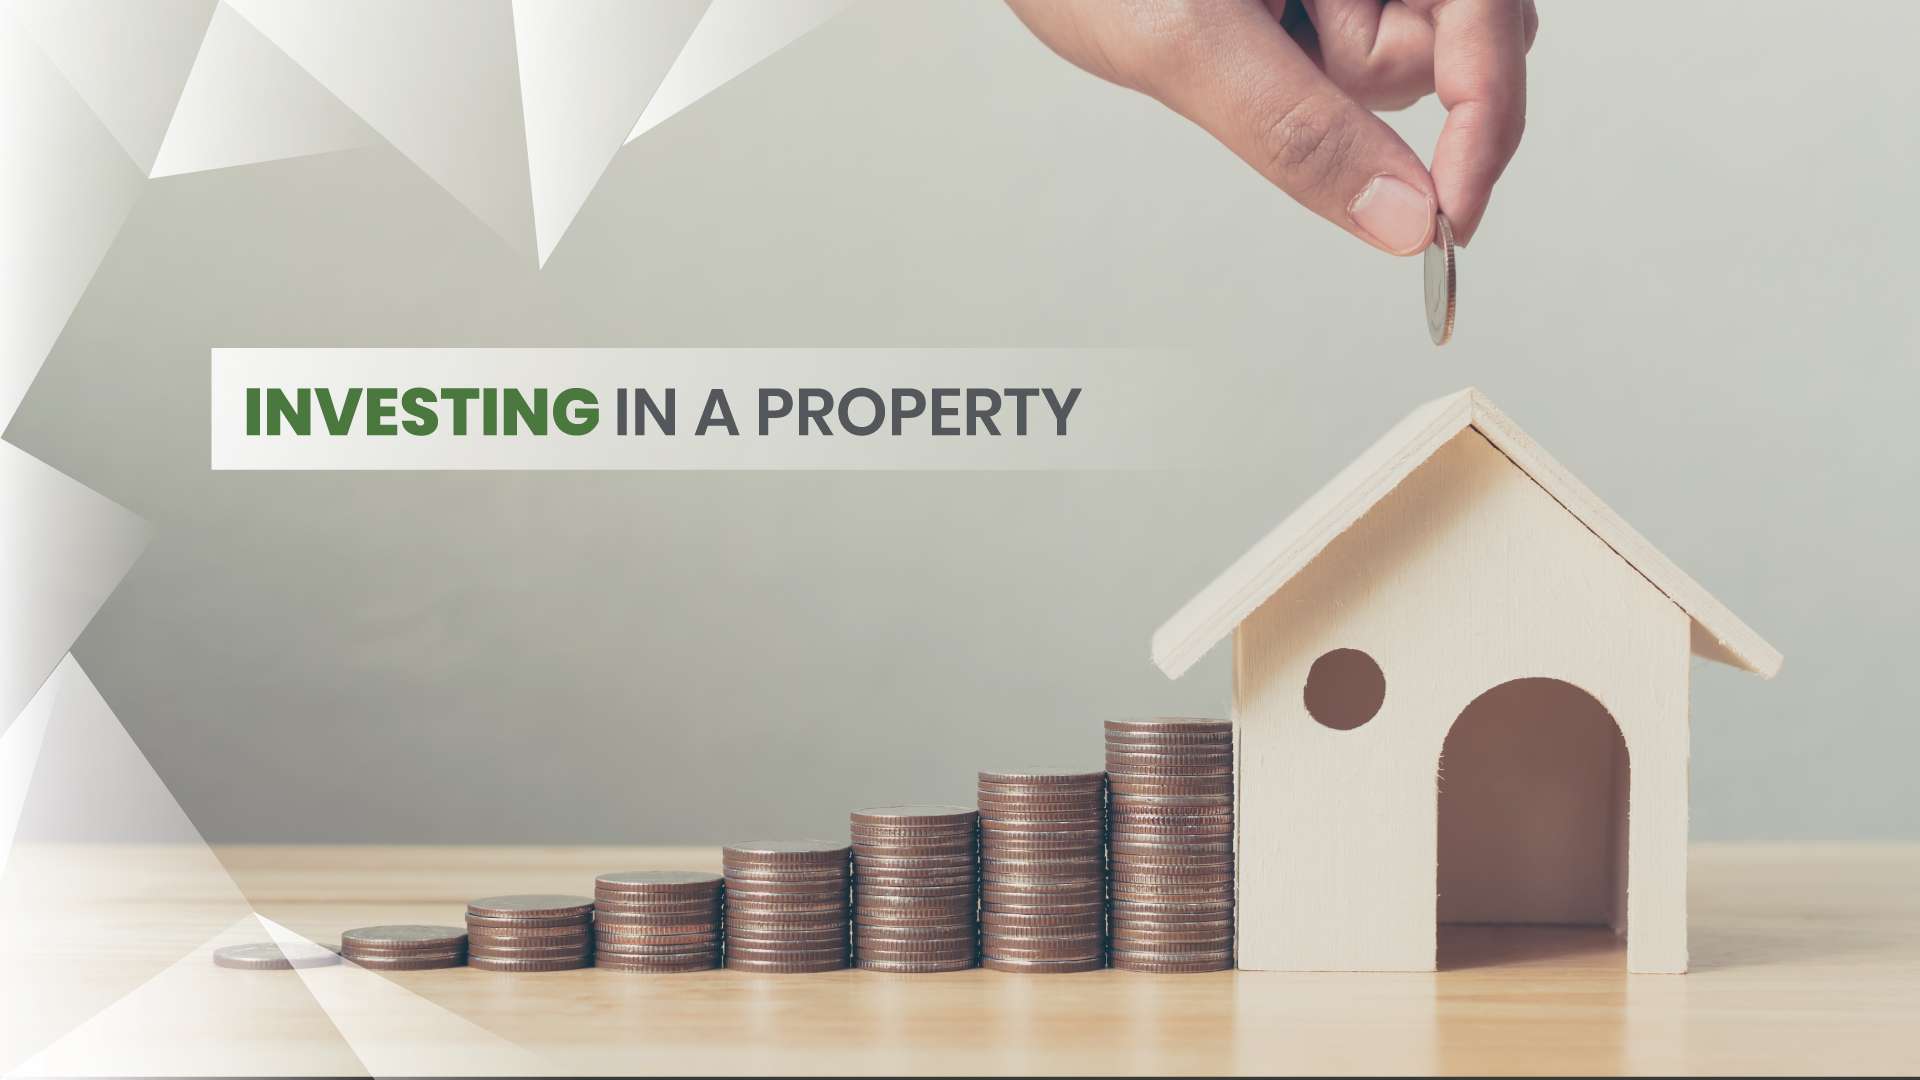 Should I Buy an Investment Property?